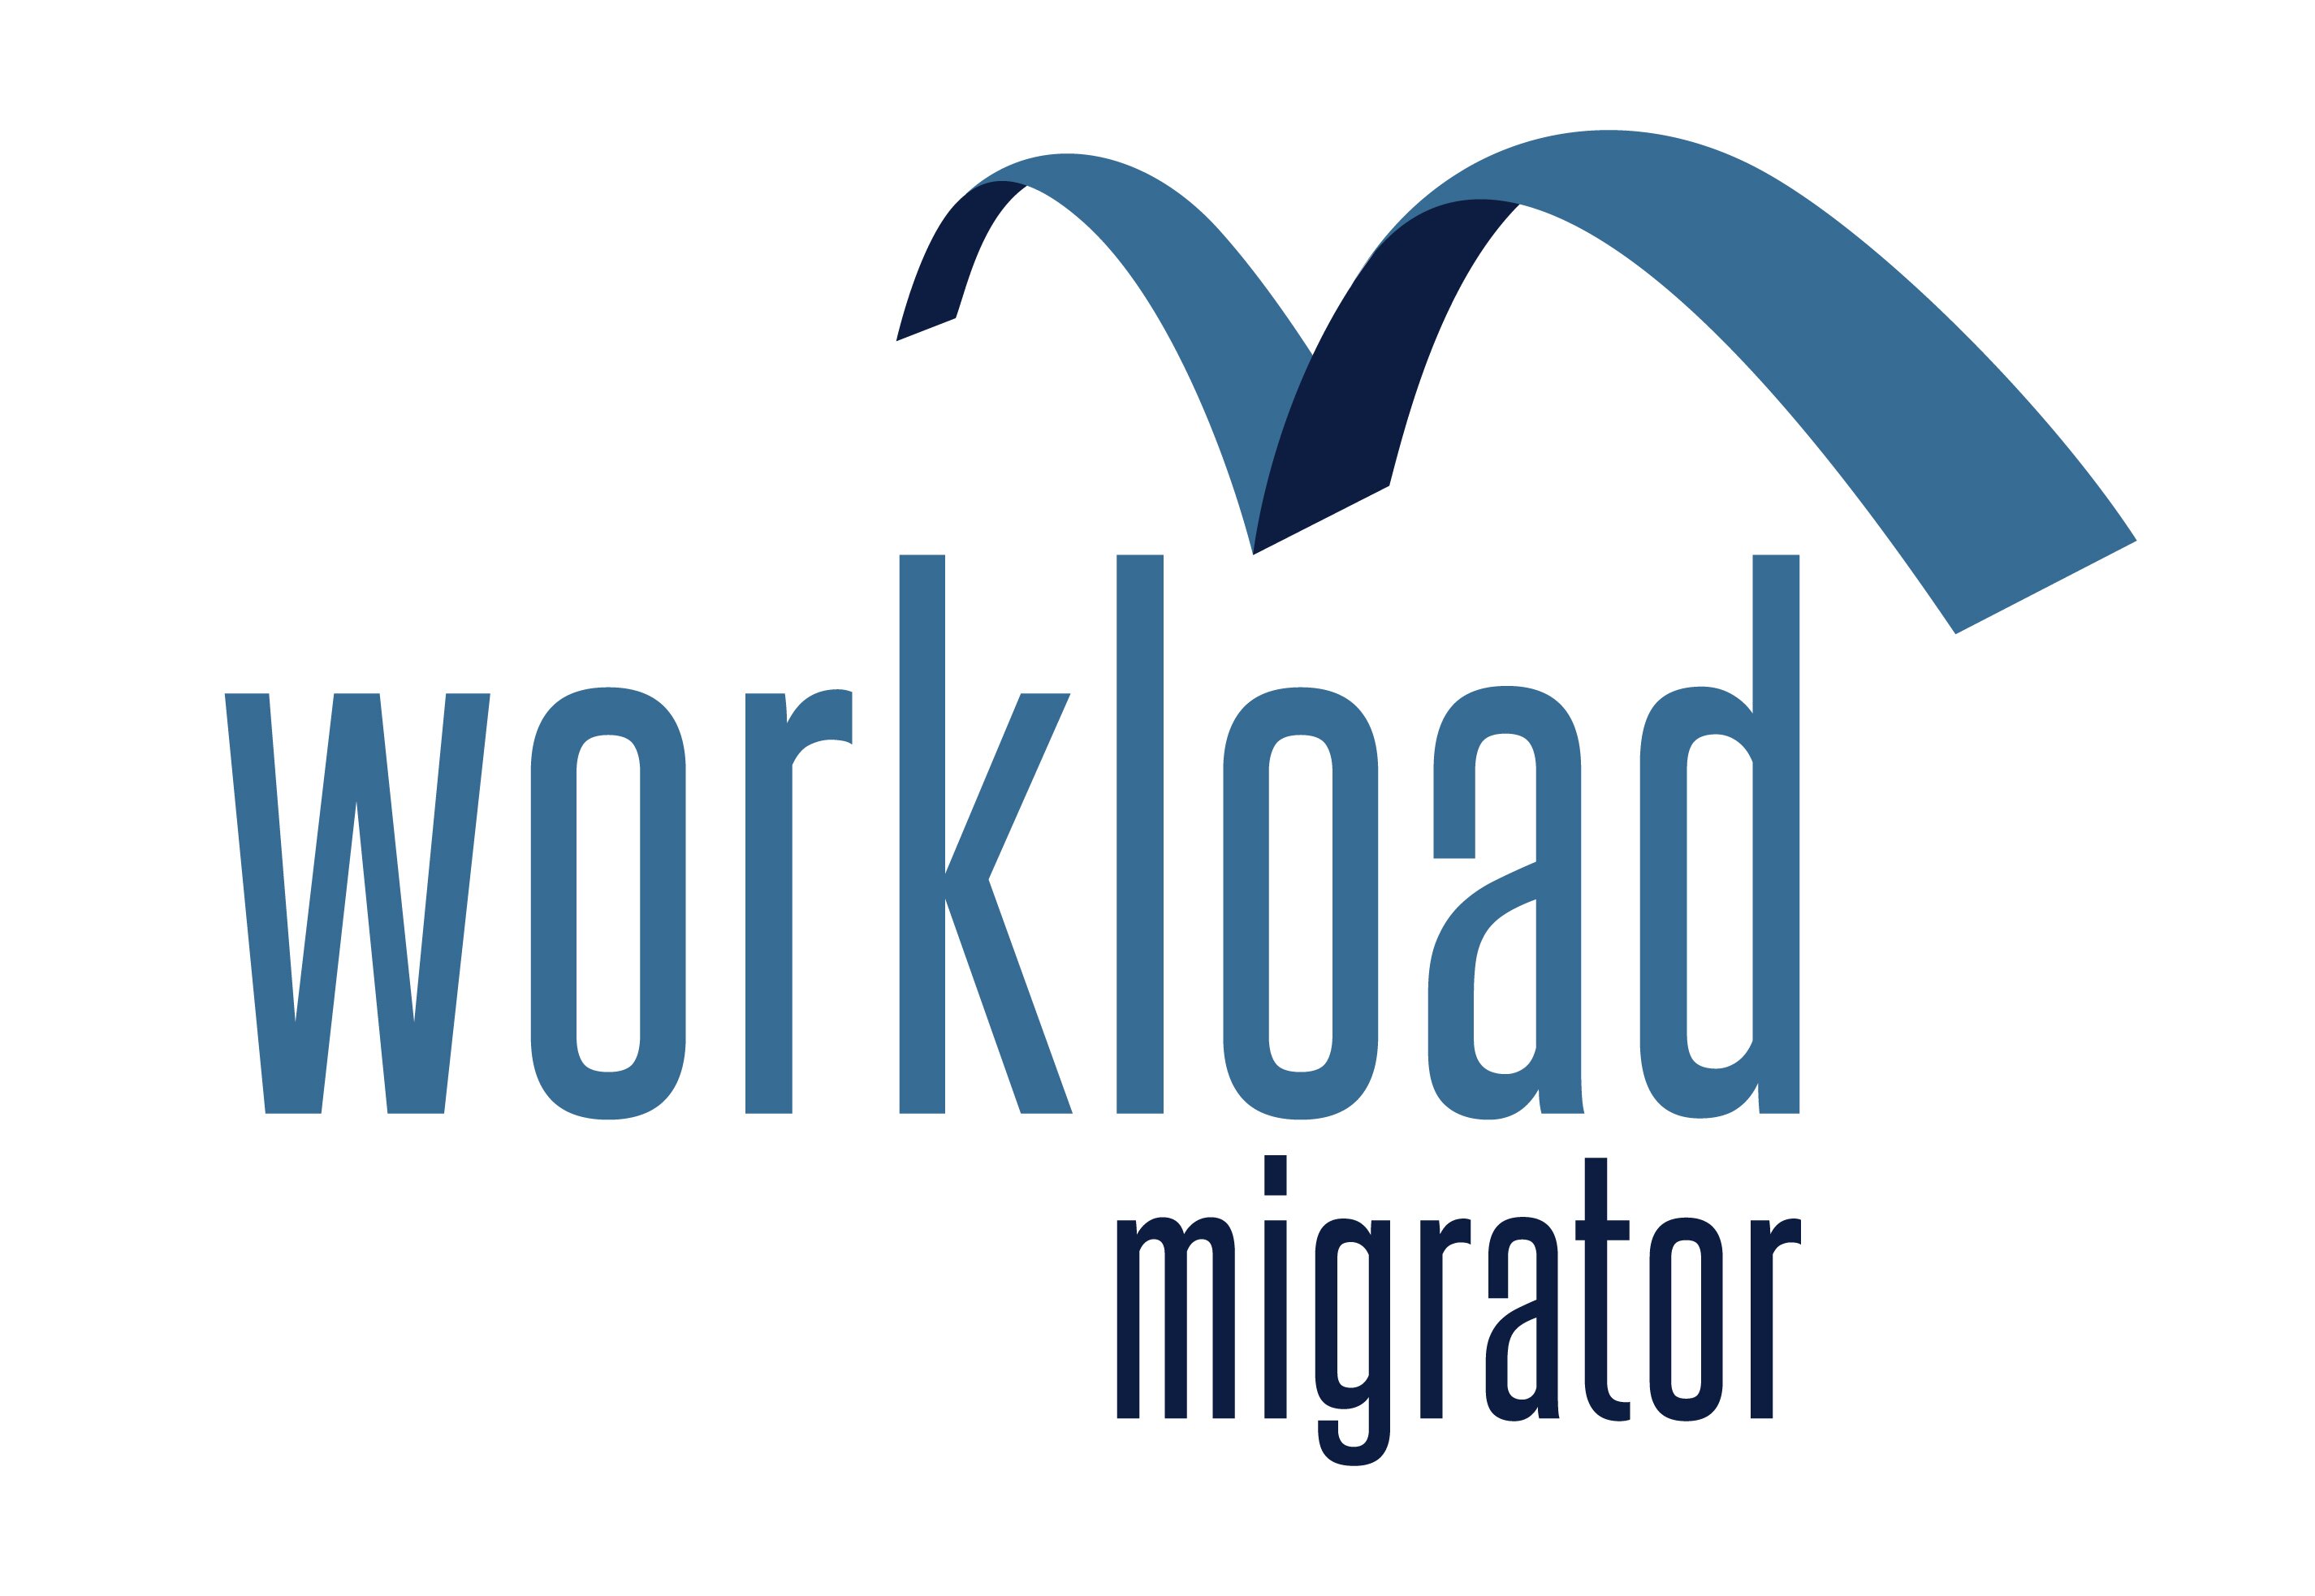 Workload Migrator provides seamless migration from distributed legacy schedulers to IBM Tivoli Workload Scheduler quickly and acurately.